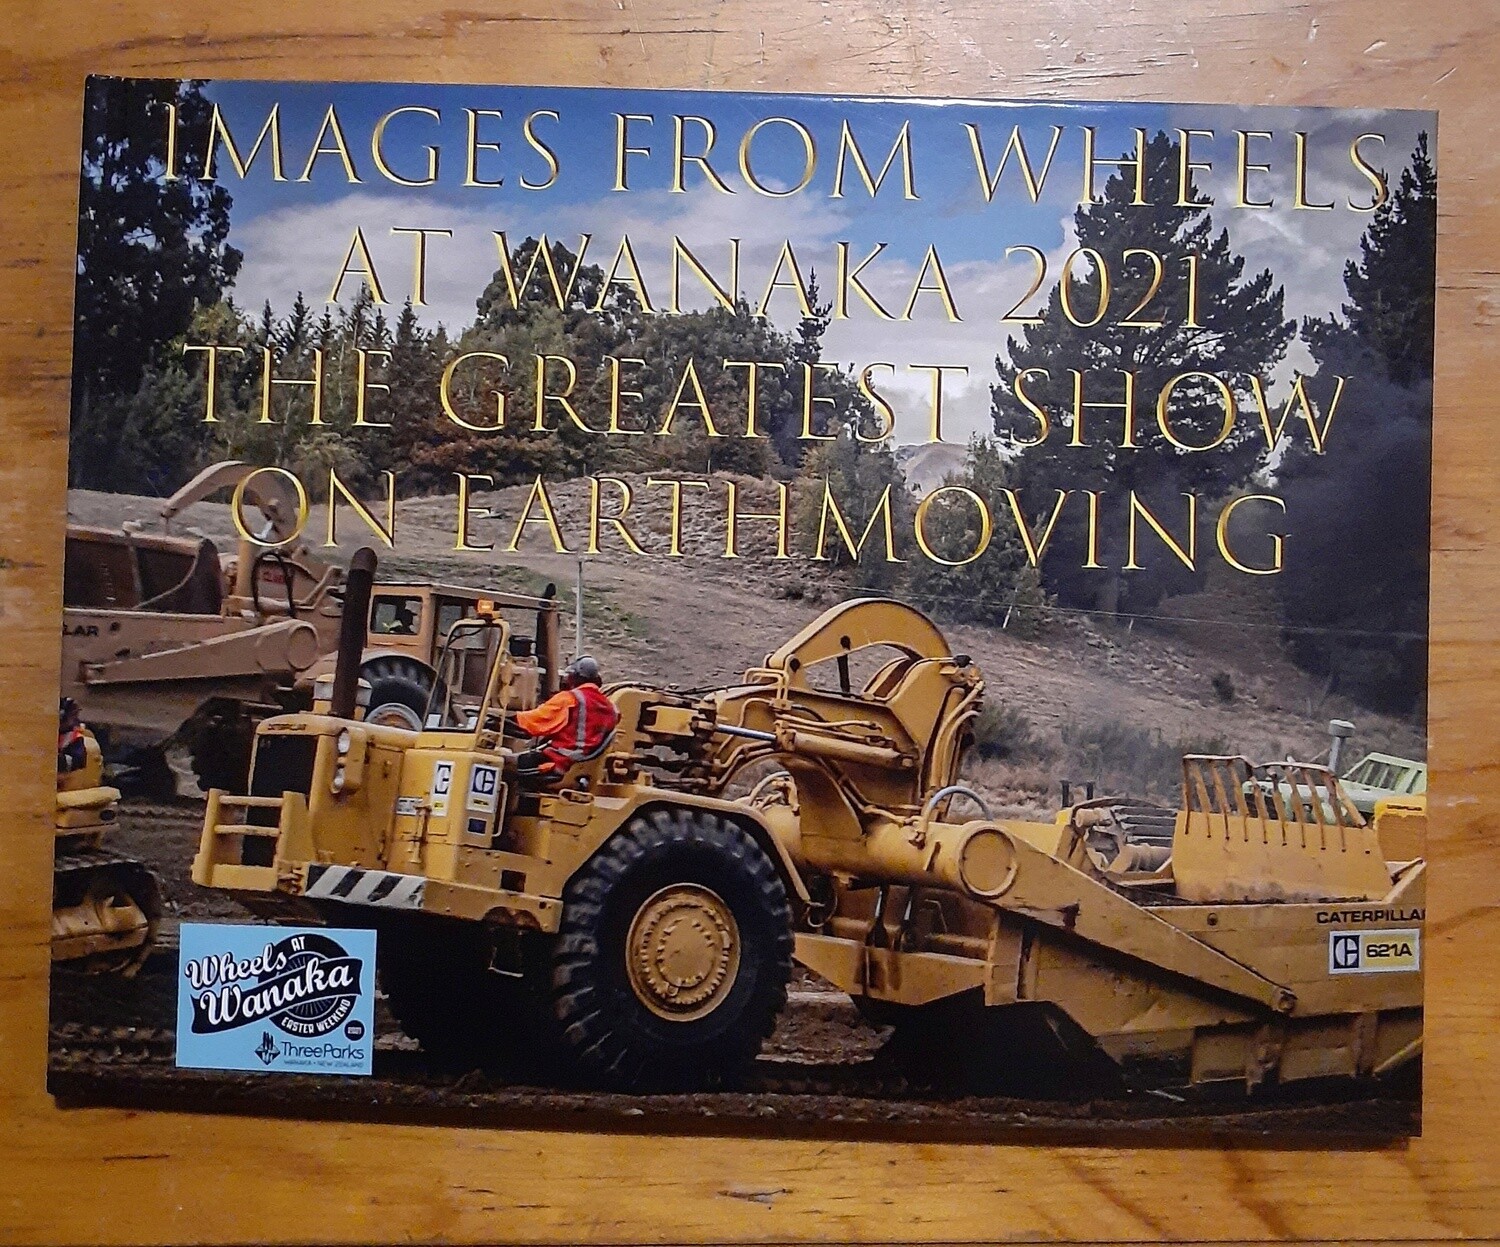 Images From Wheels At Wanaka 2021, The Greatest show on Earthmoving.